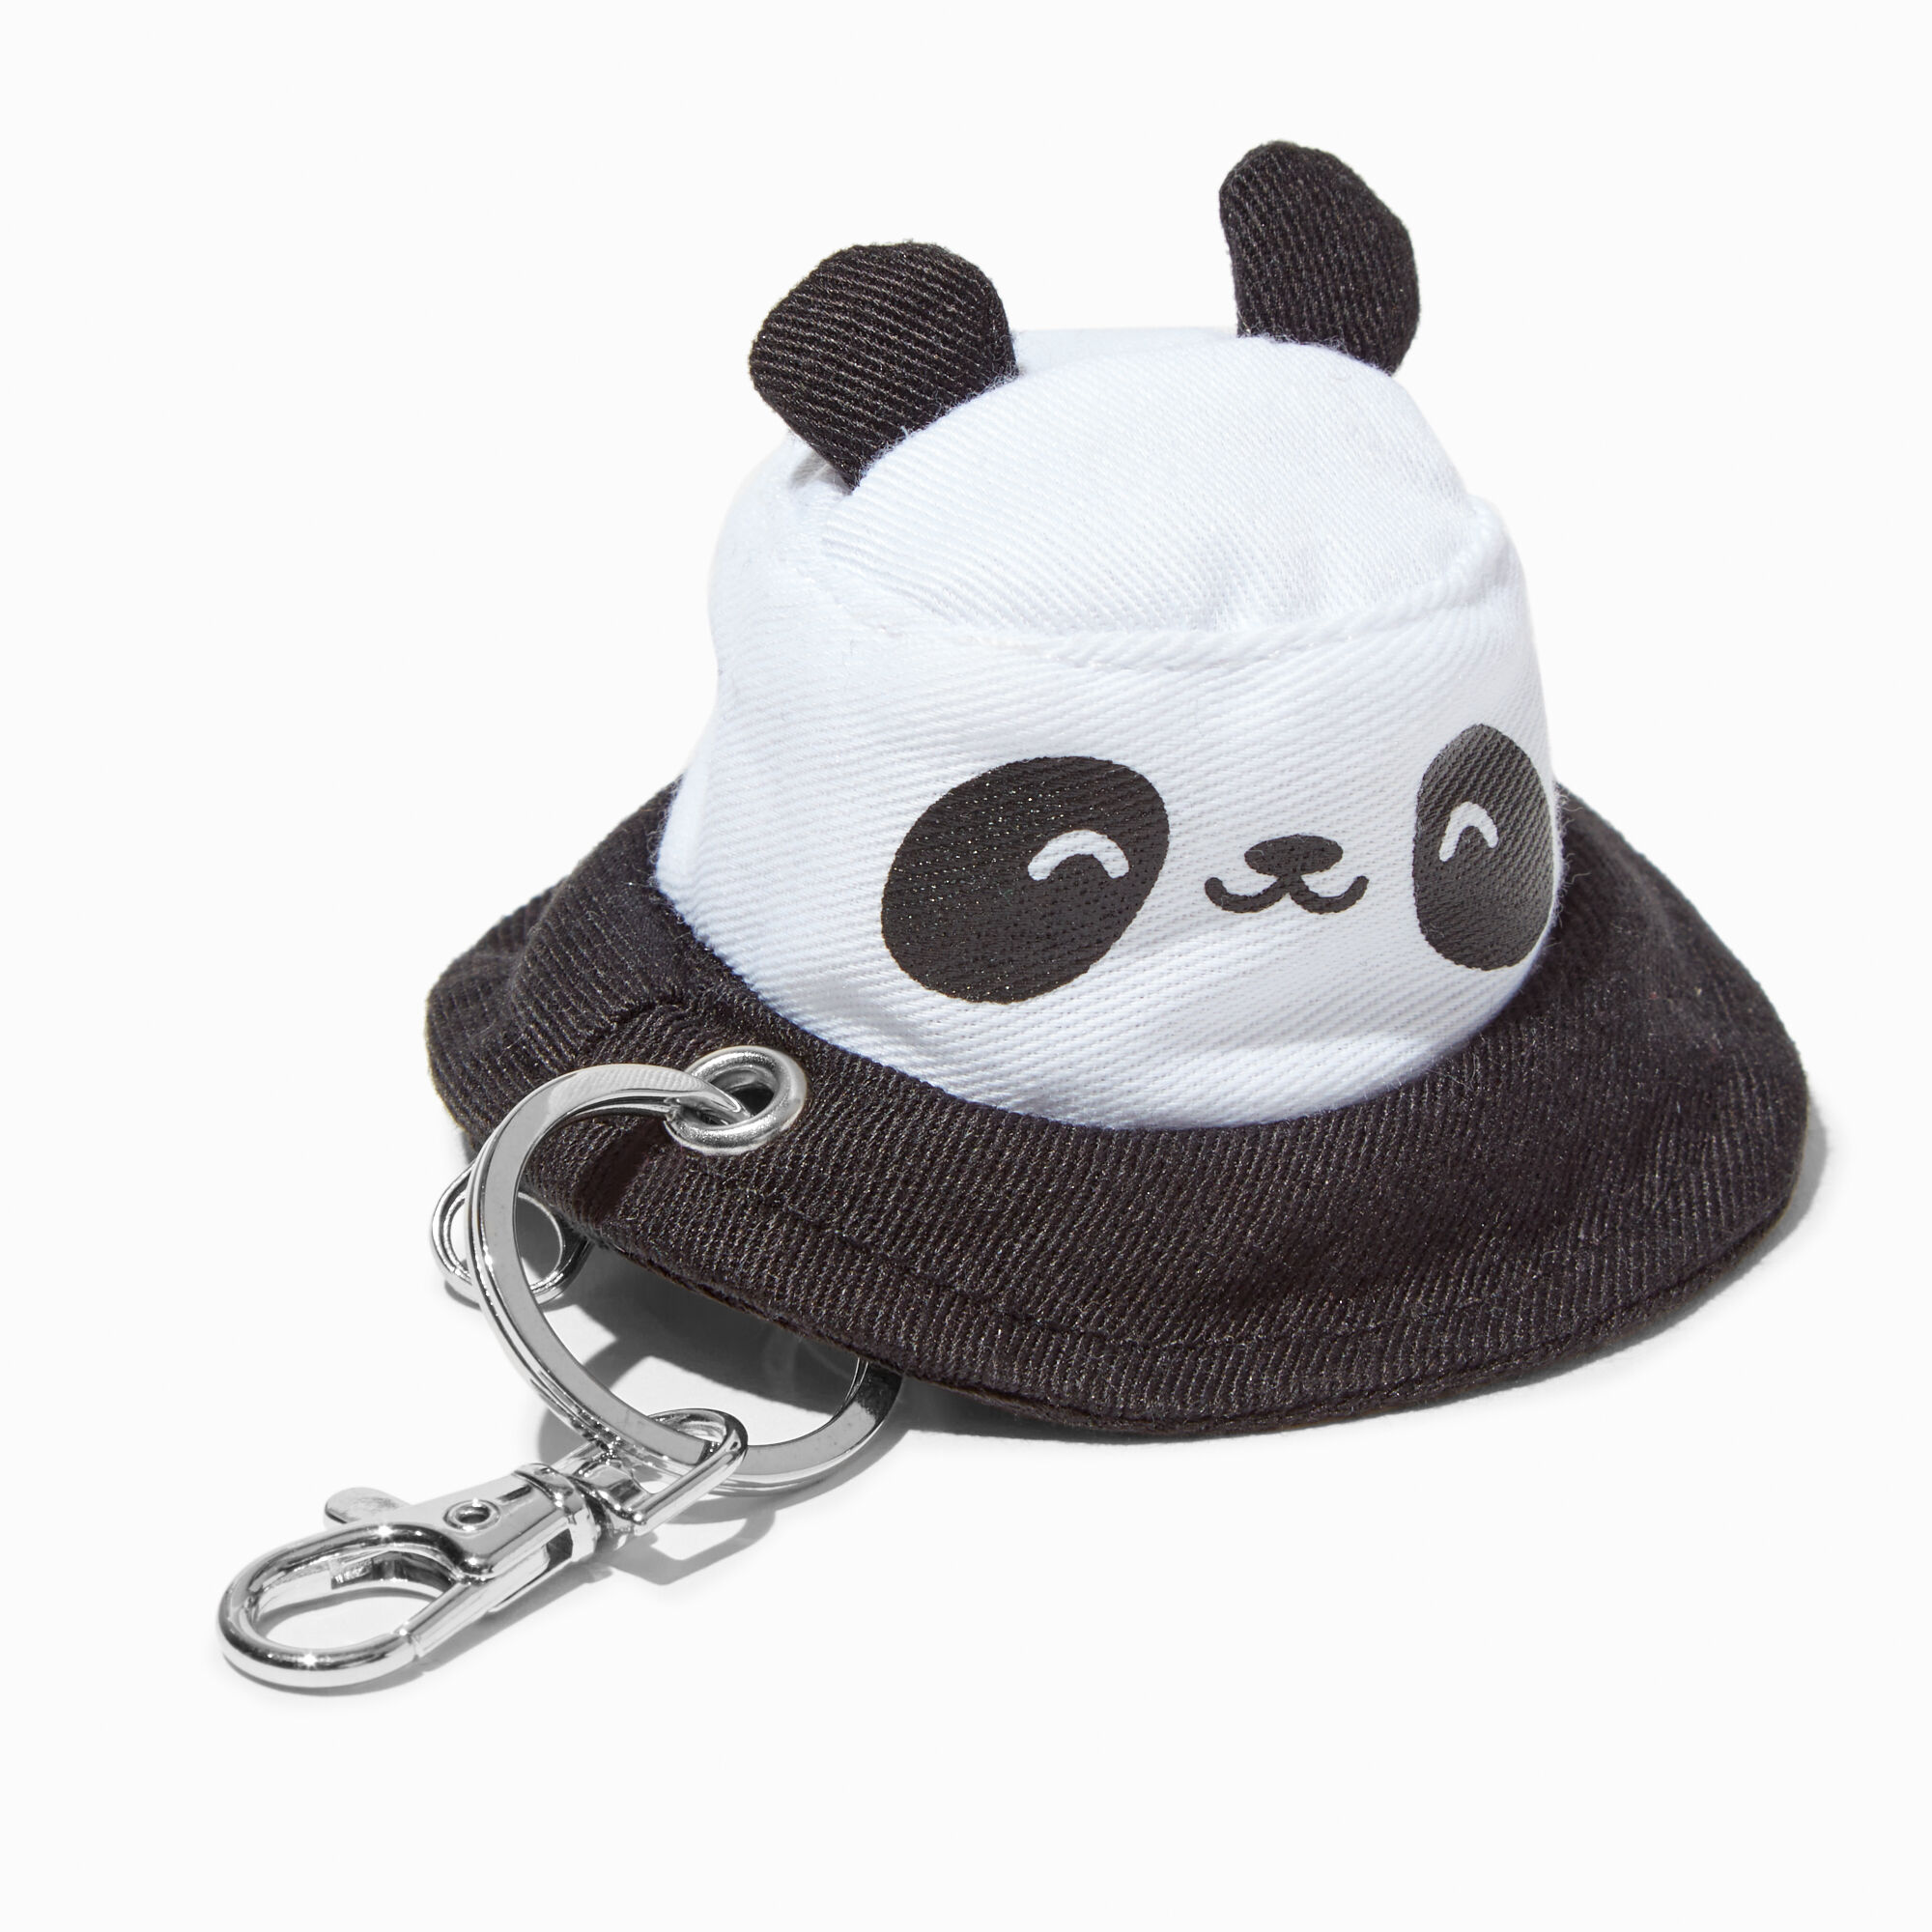 View Claires Panda Bucket Hat Keychain Silver information